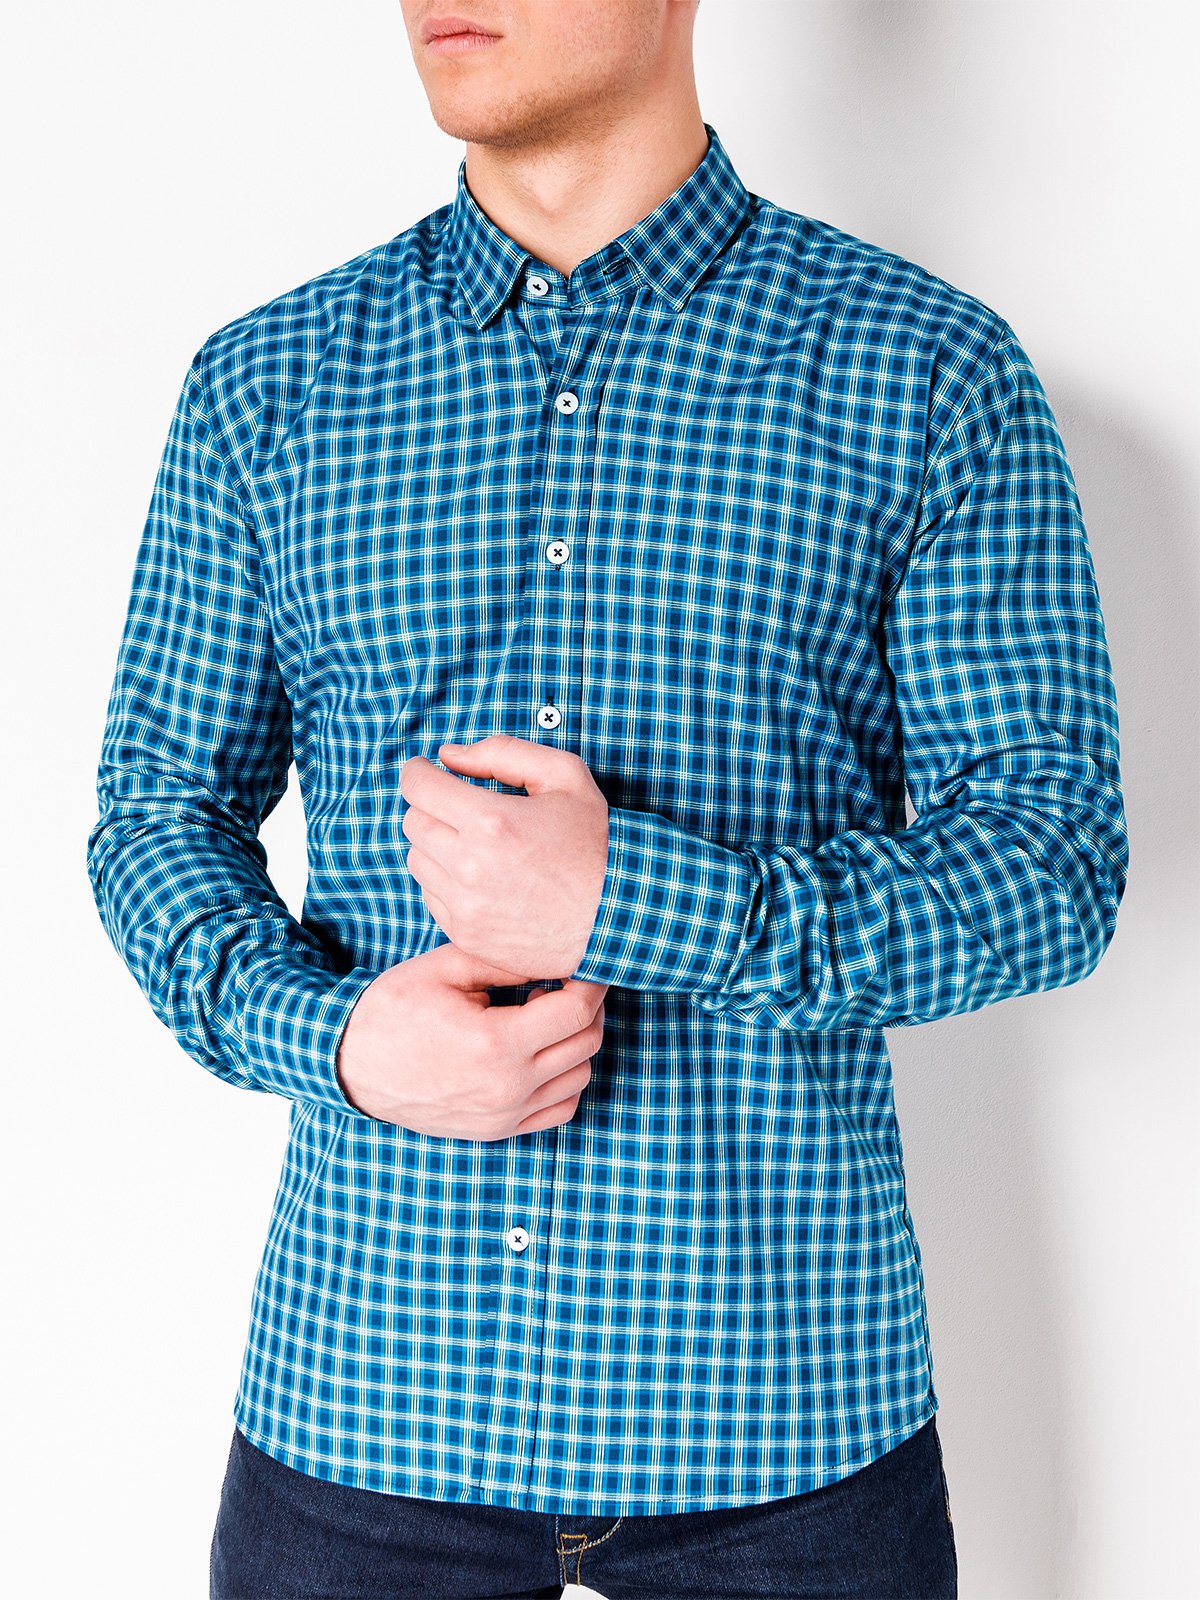 Men's check shirt with long sleeves K438 - navy/green | MODONE ...